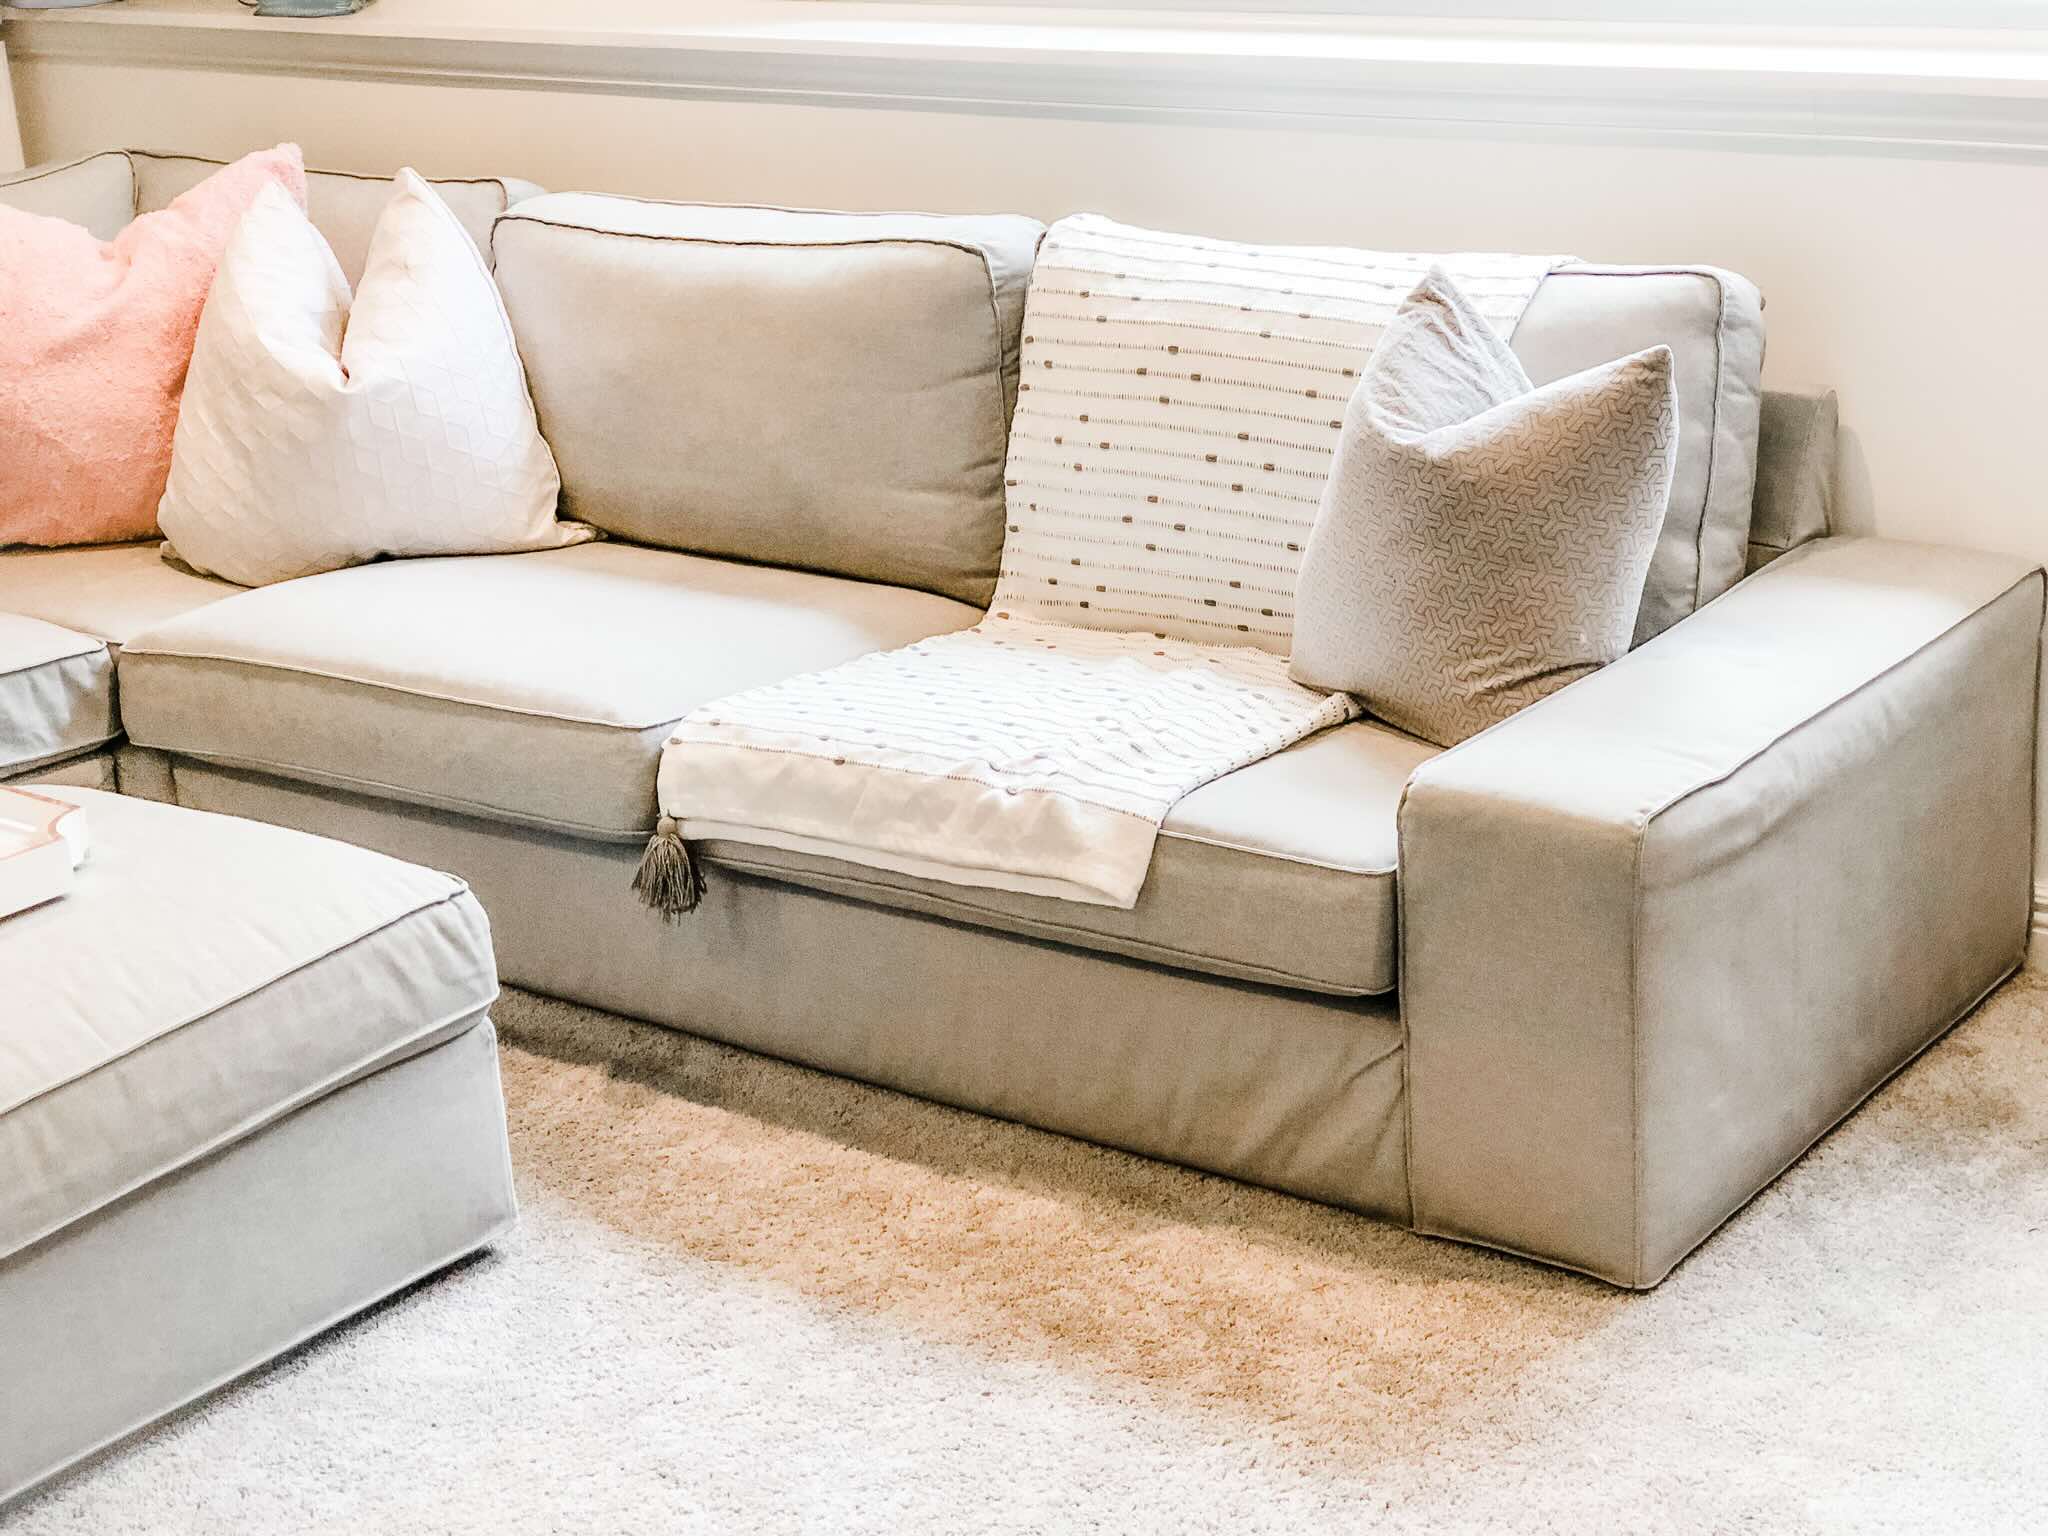 How To Clean IKEA Couch Cushions